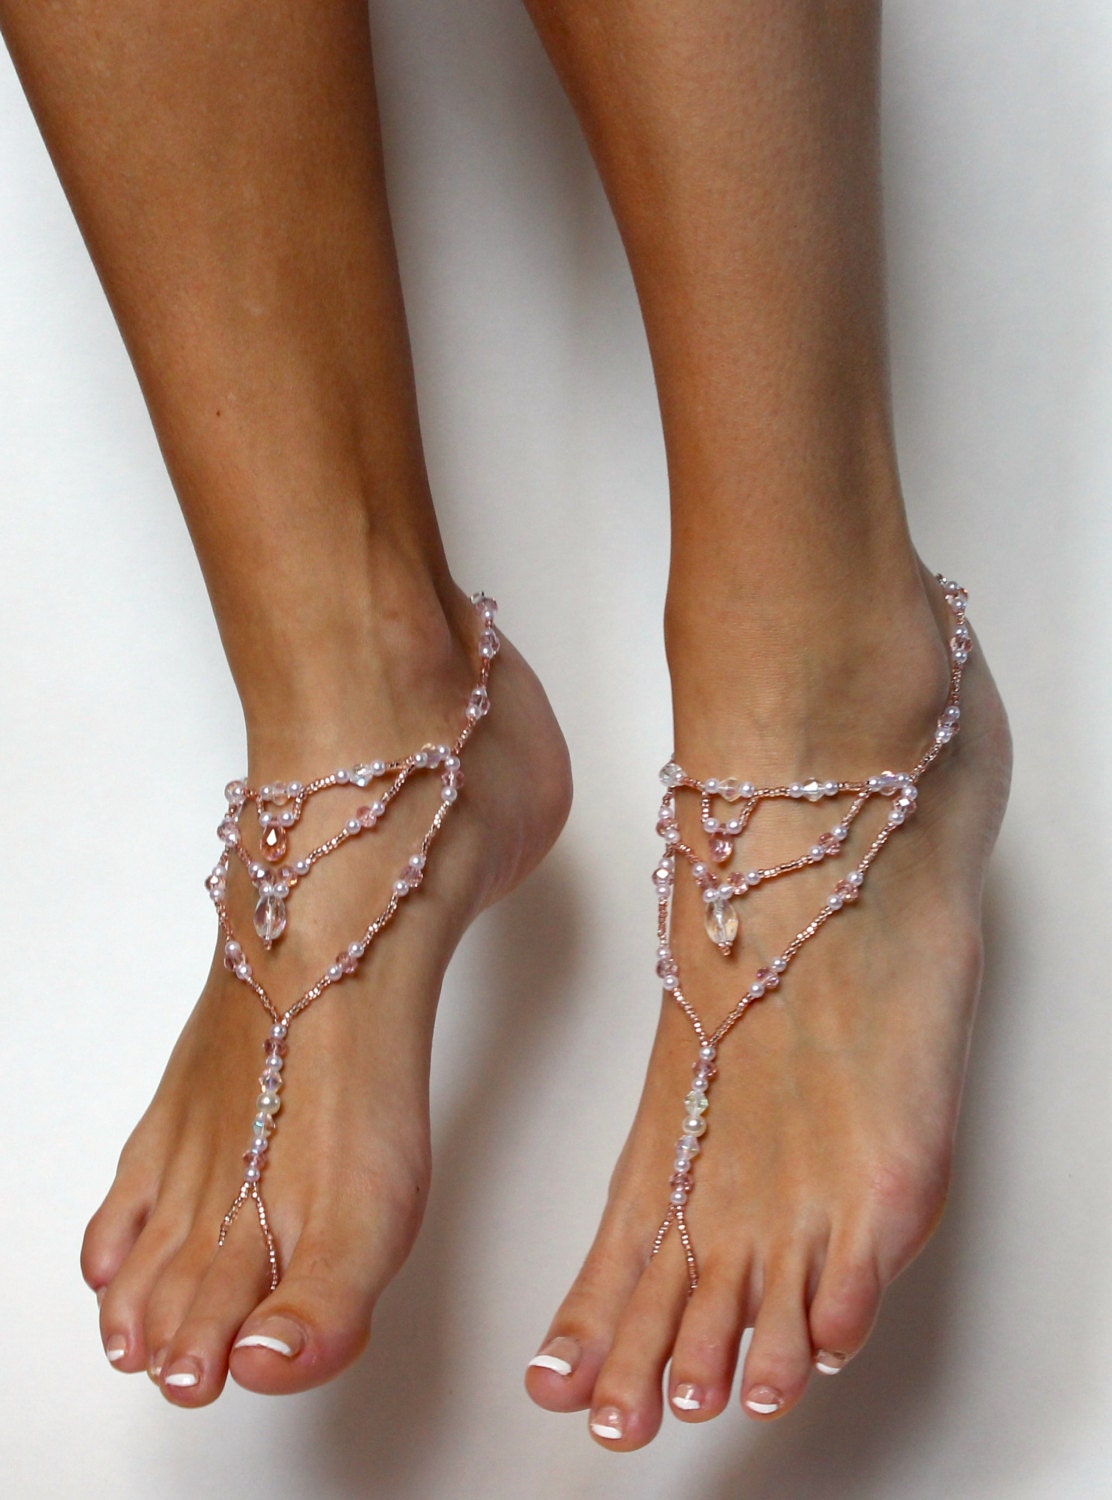 Champagne Barefoot Sandals Foot Jewelry for Beach Wedding